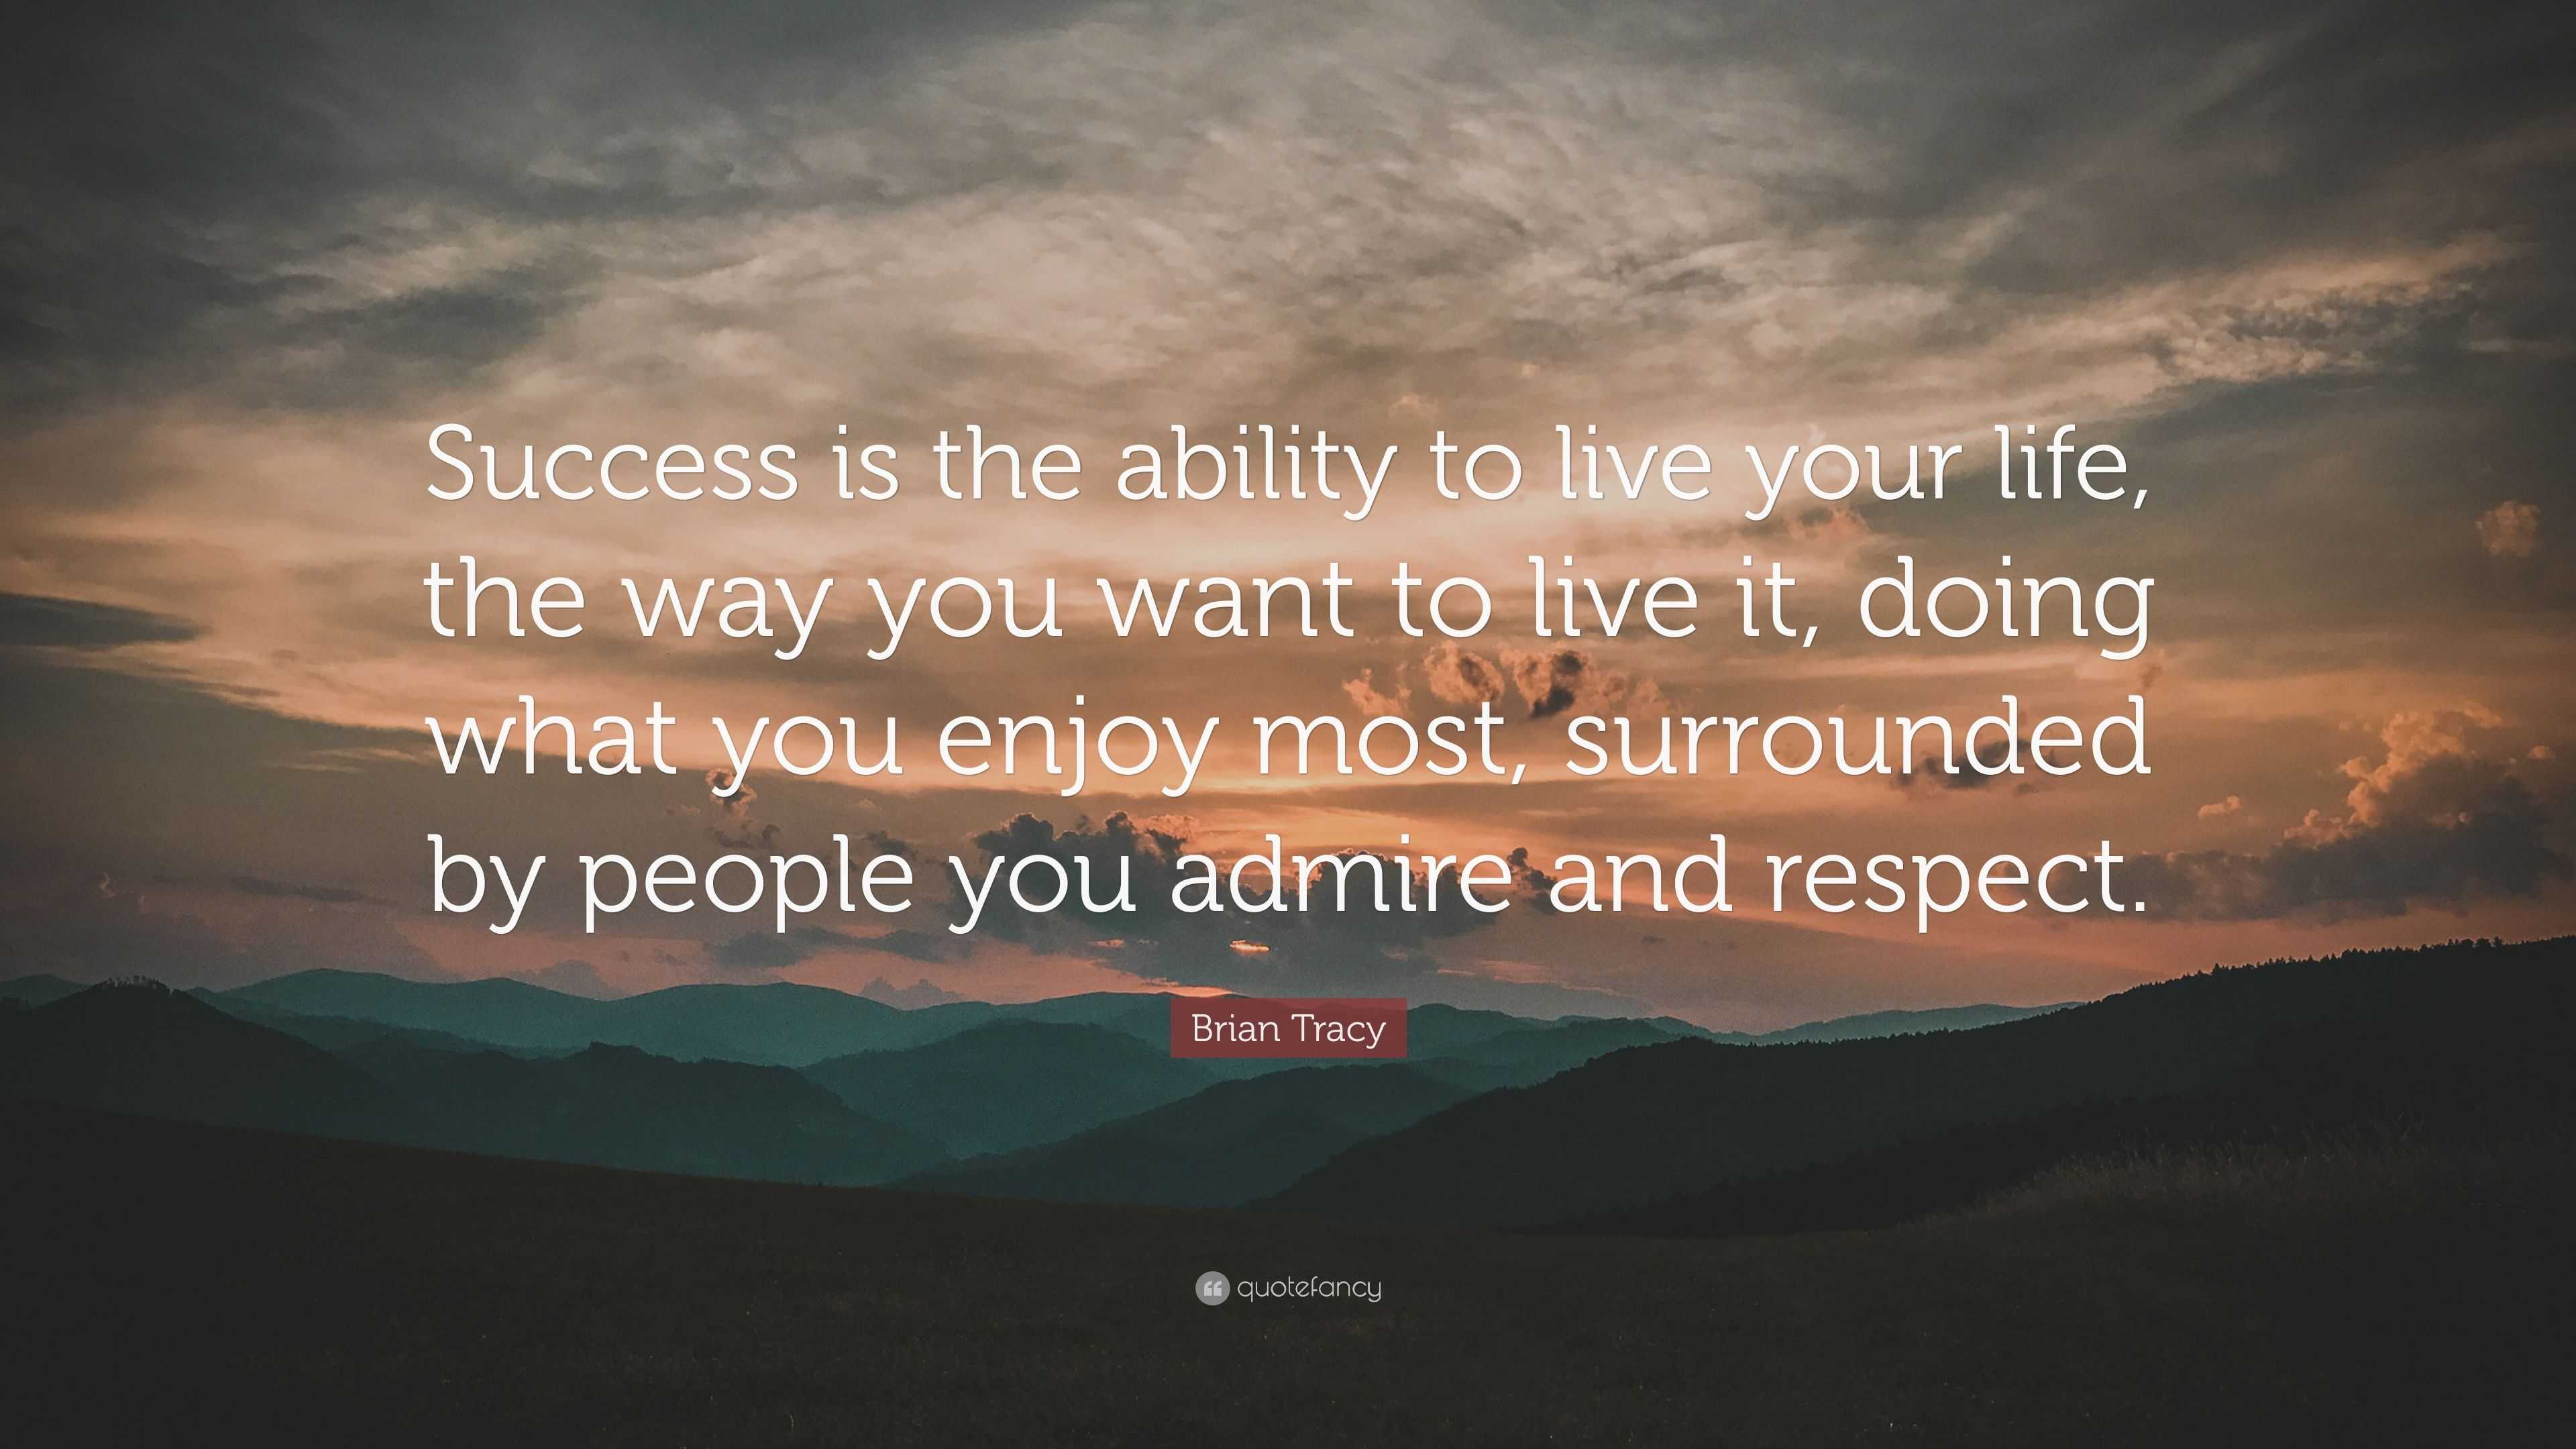 Brian Tracy Quote “Success is the ability to live your life the way